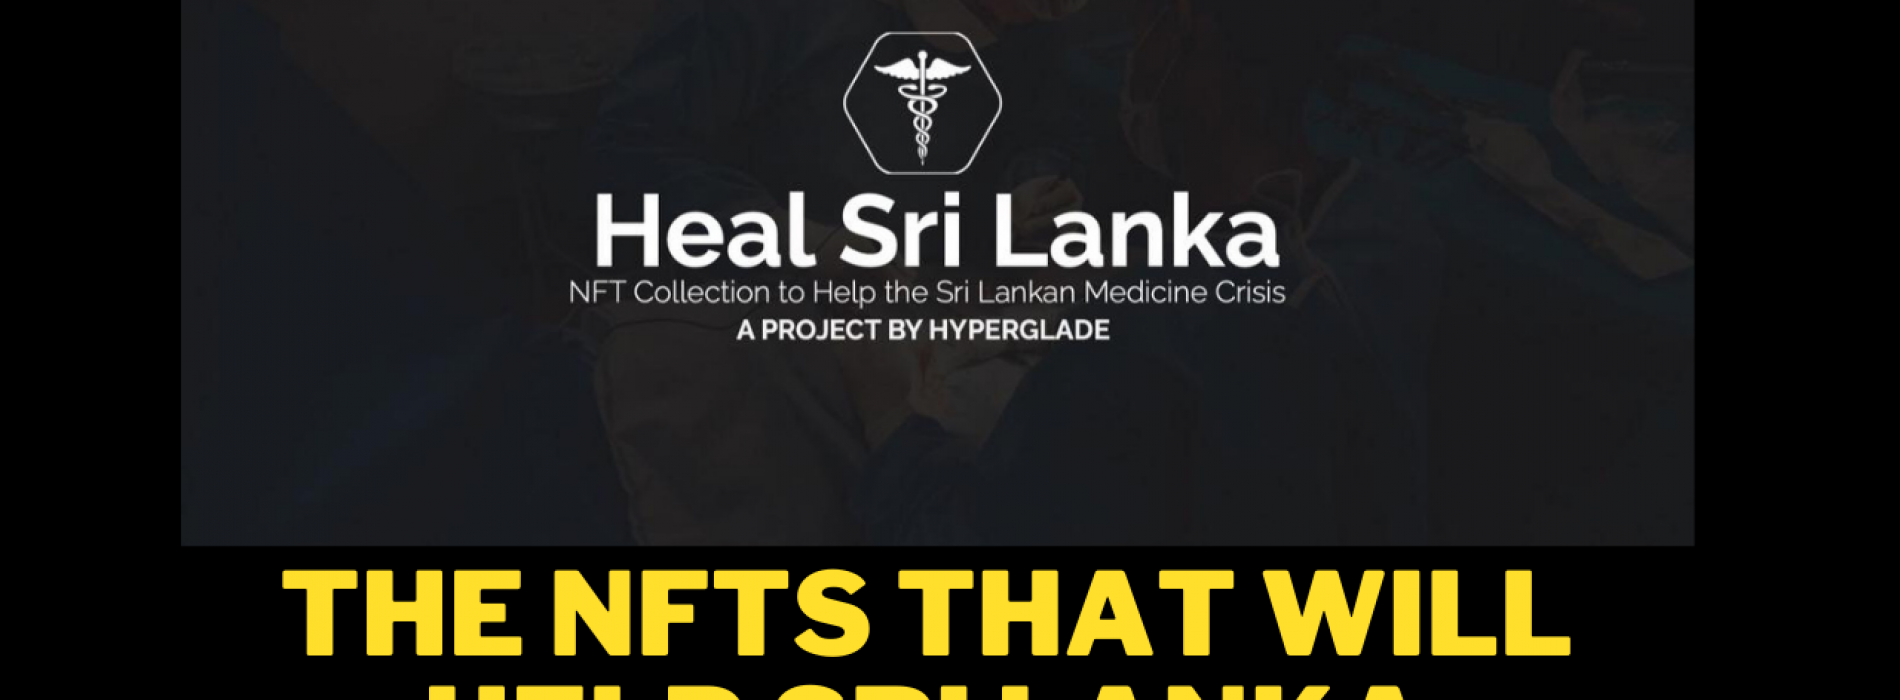 News : NFTs Are Coming To Aid Sri Lanka’s Medicine Shortage, Here’s How